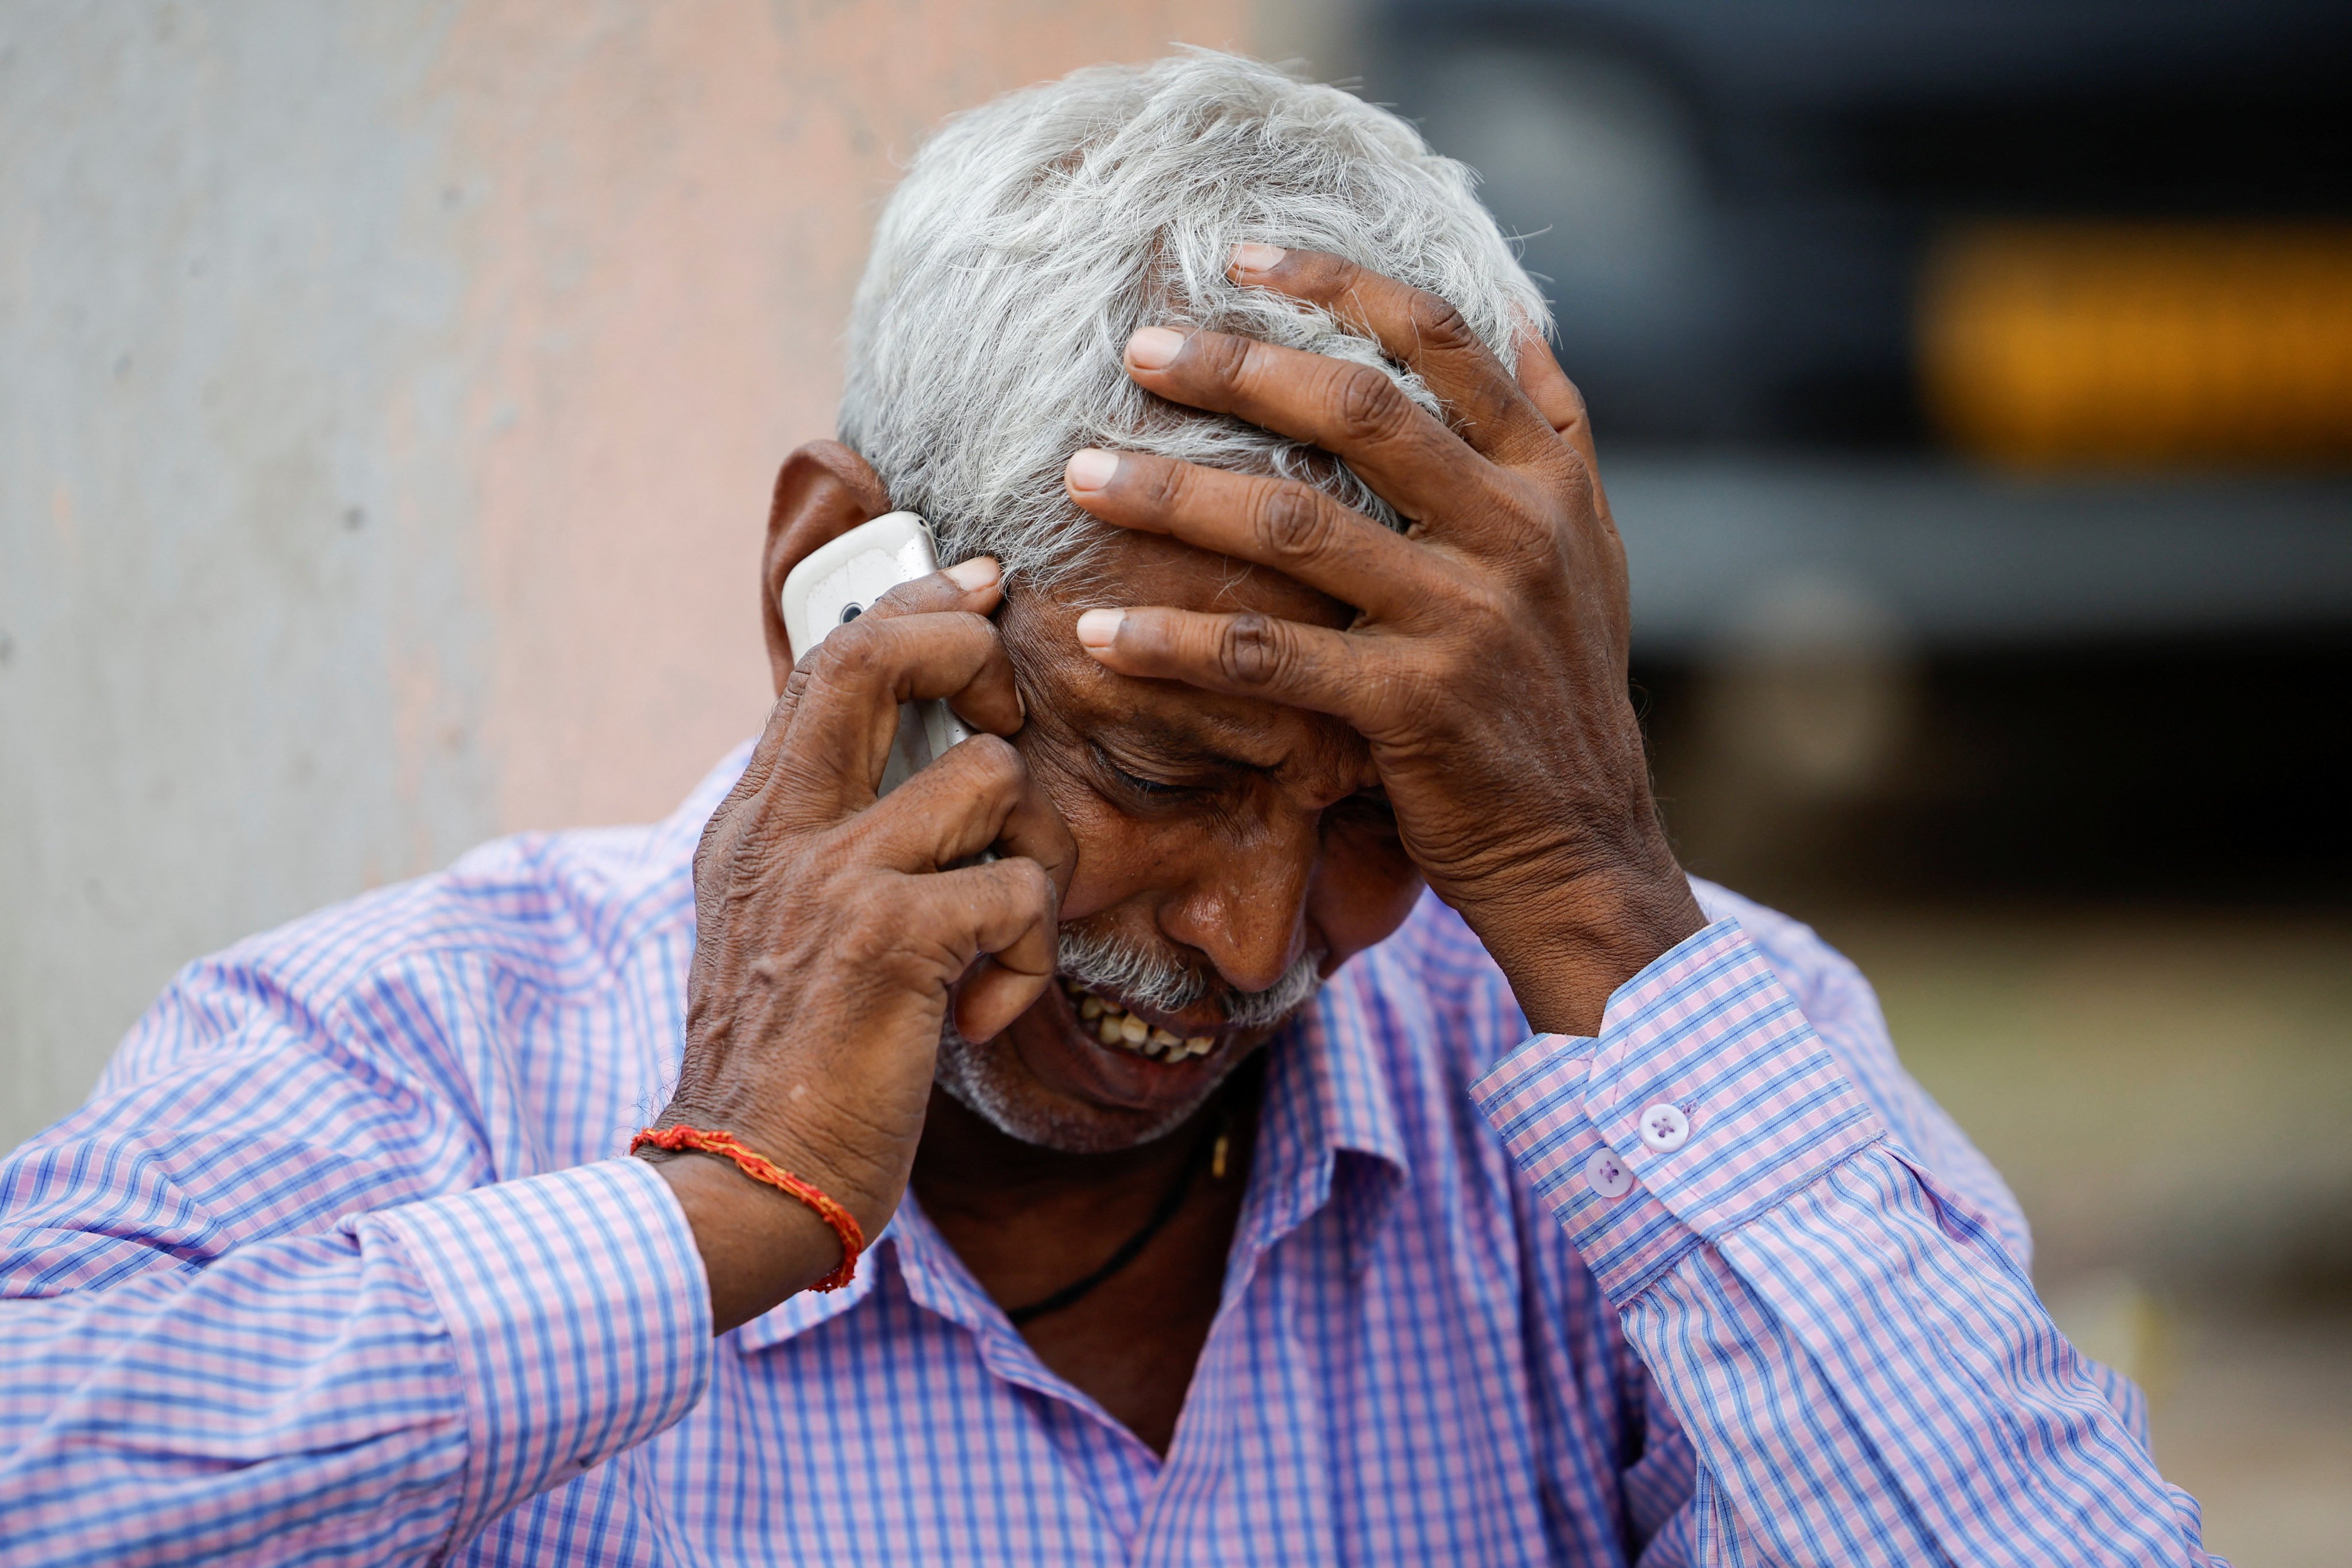 Chedilal, 65, whose daughter died in the stampede, speaks on the phone as he mourns outside a hospital in the Hathras district of Uttar Pradesh, India, on July 3. Photo: Reuters